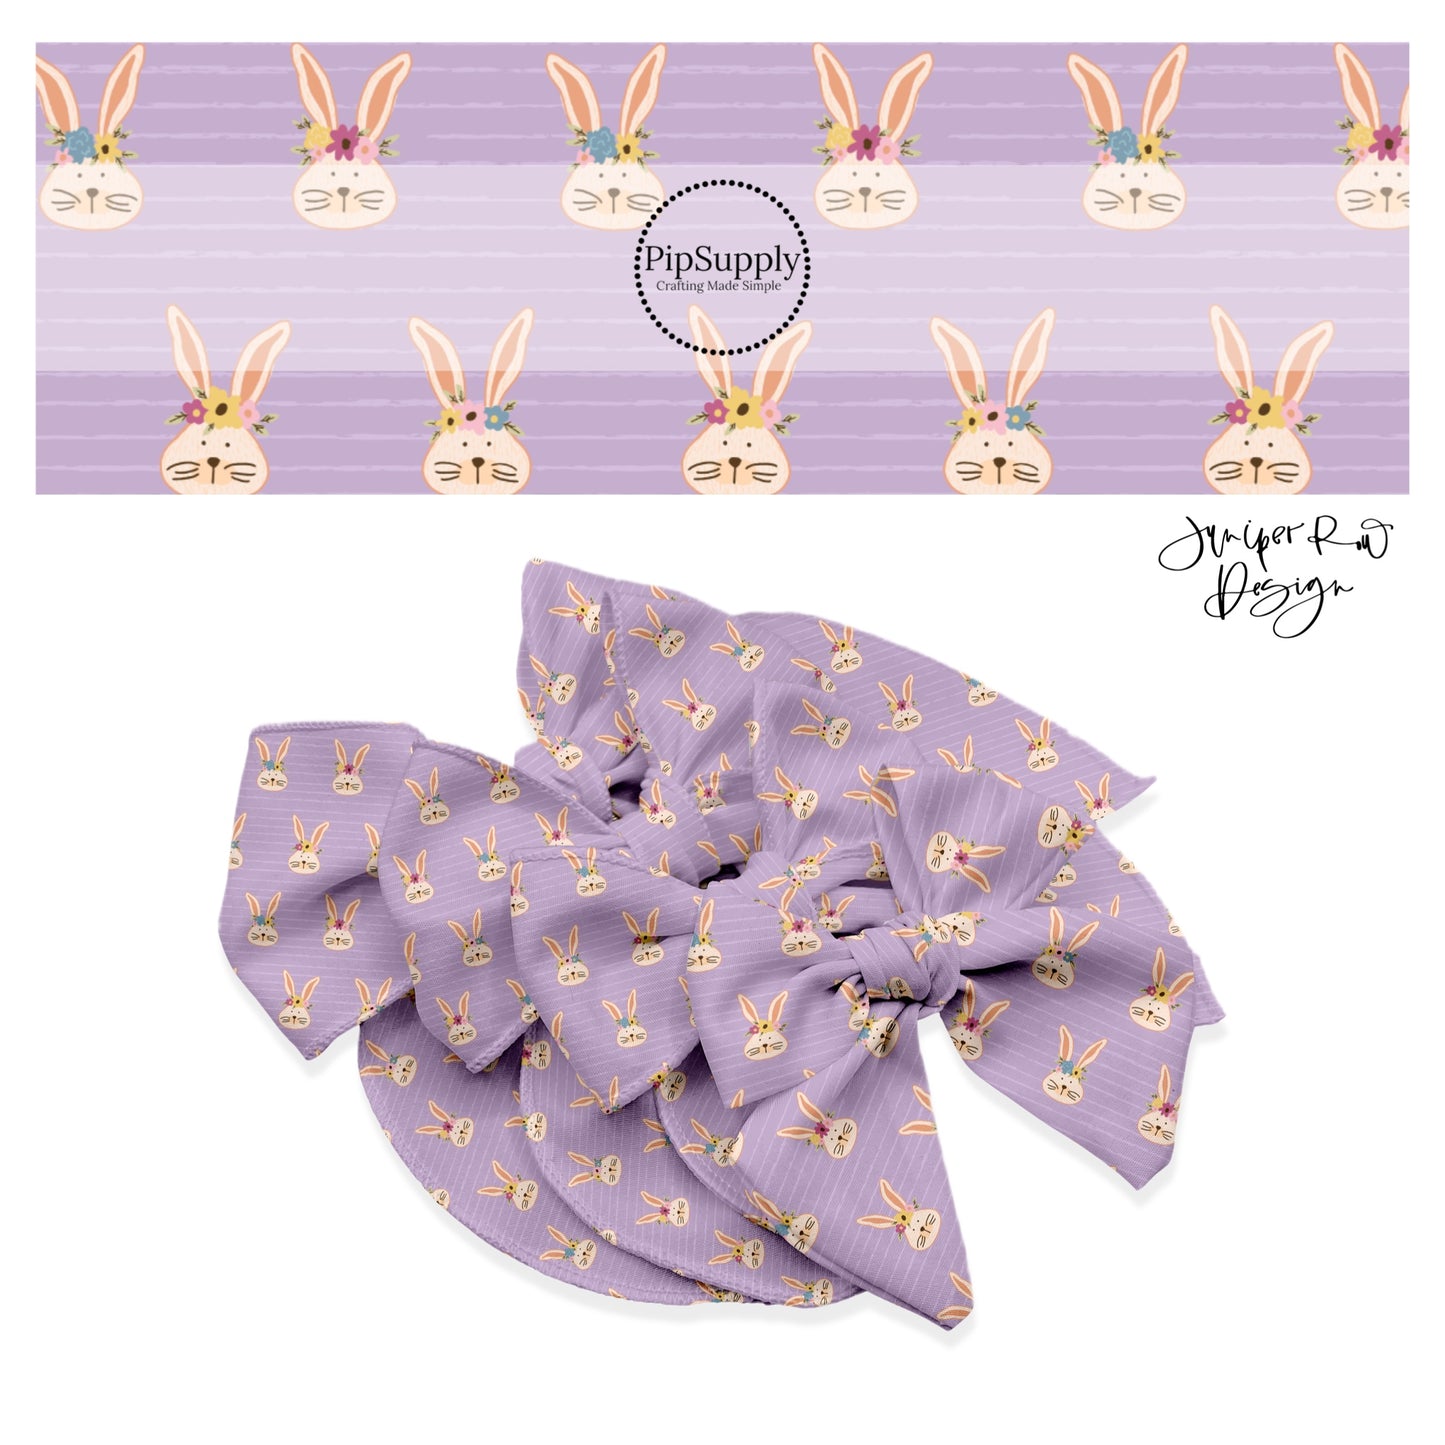 Brown bunnies with floral crowns on lavender stripe bow strips